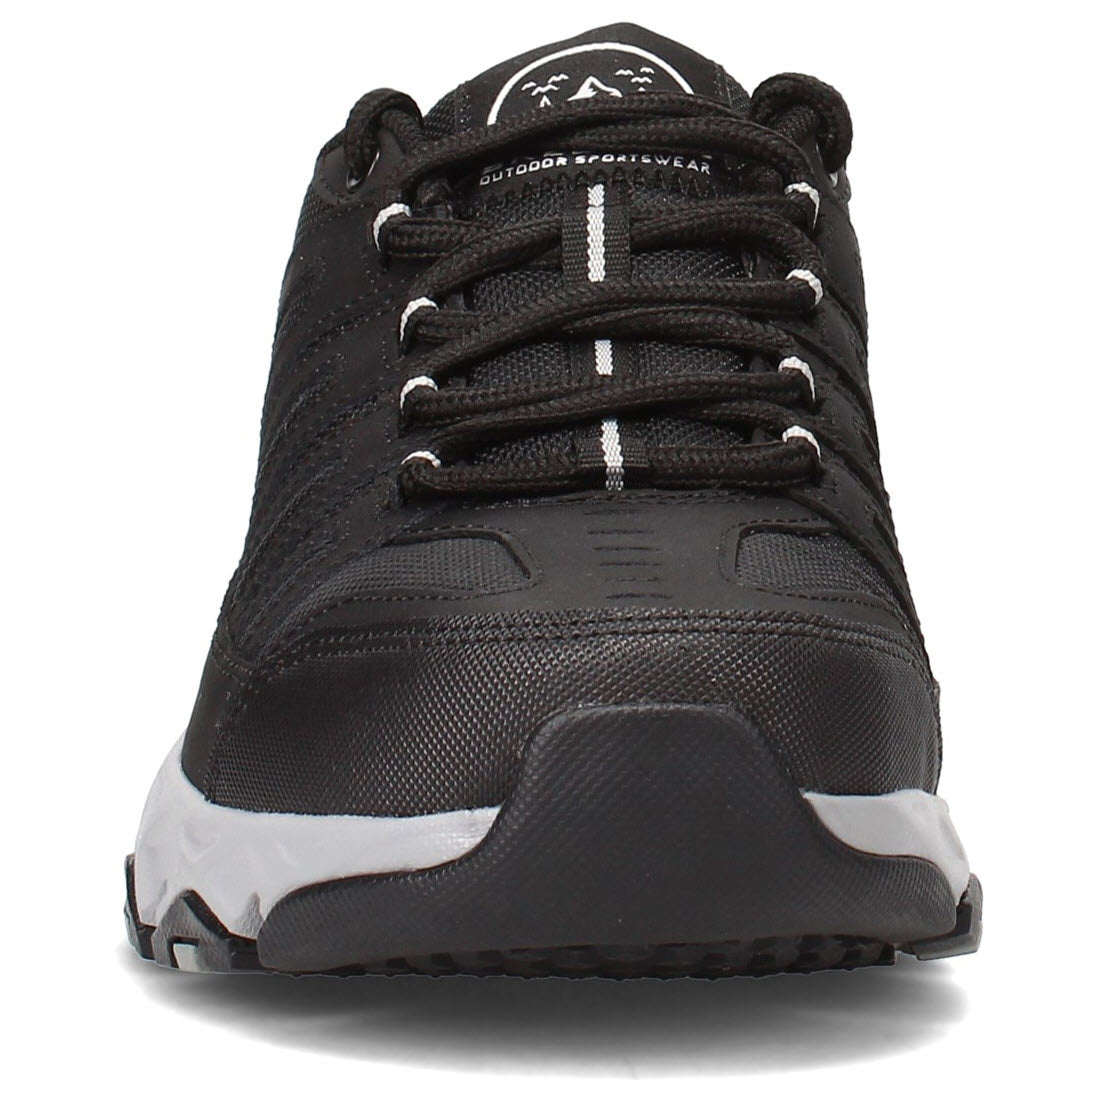 Front view of a Skechers Crossbar Stilholt black athletic shoe with white laces and a white sole.